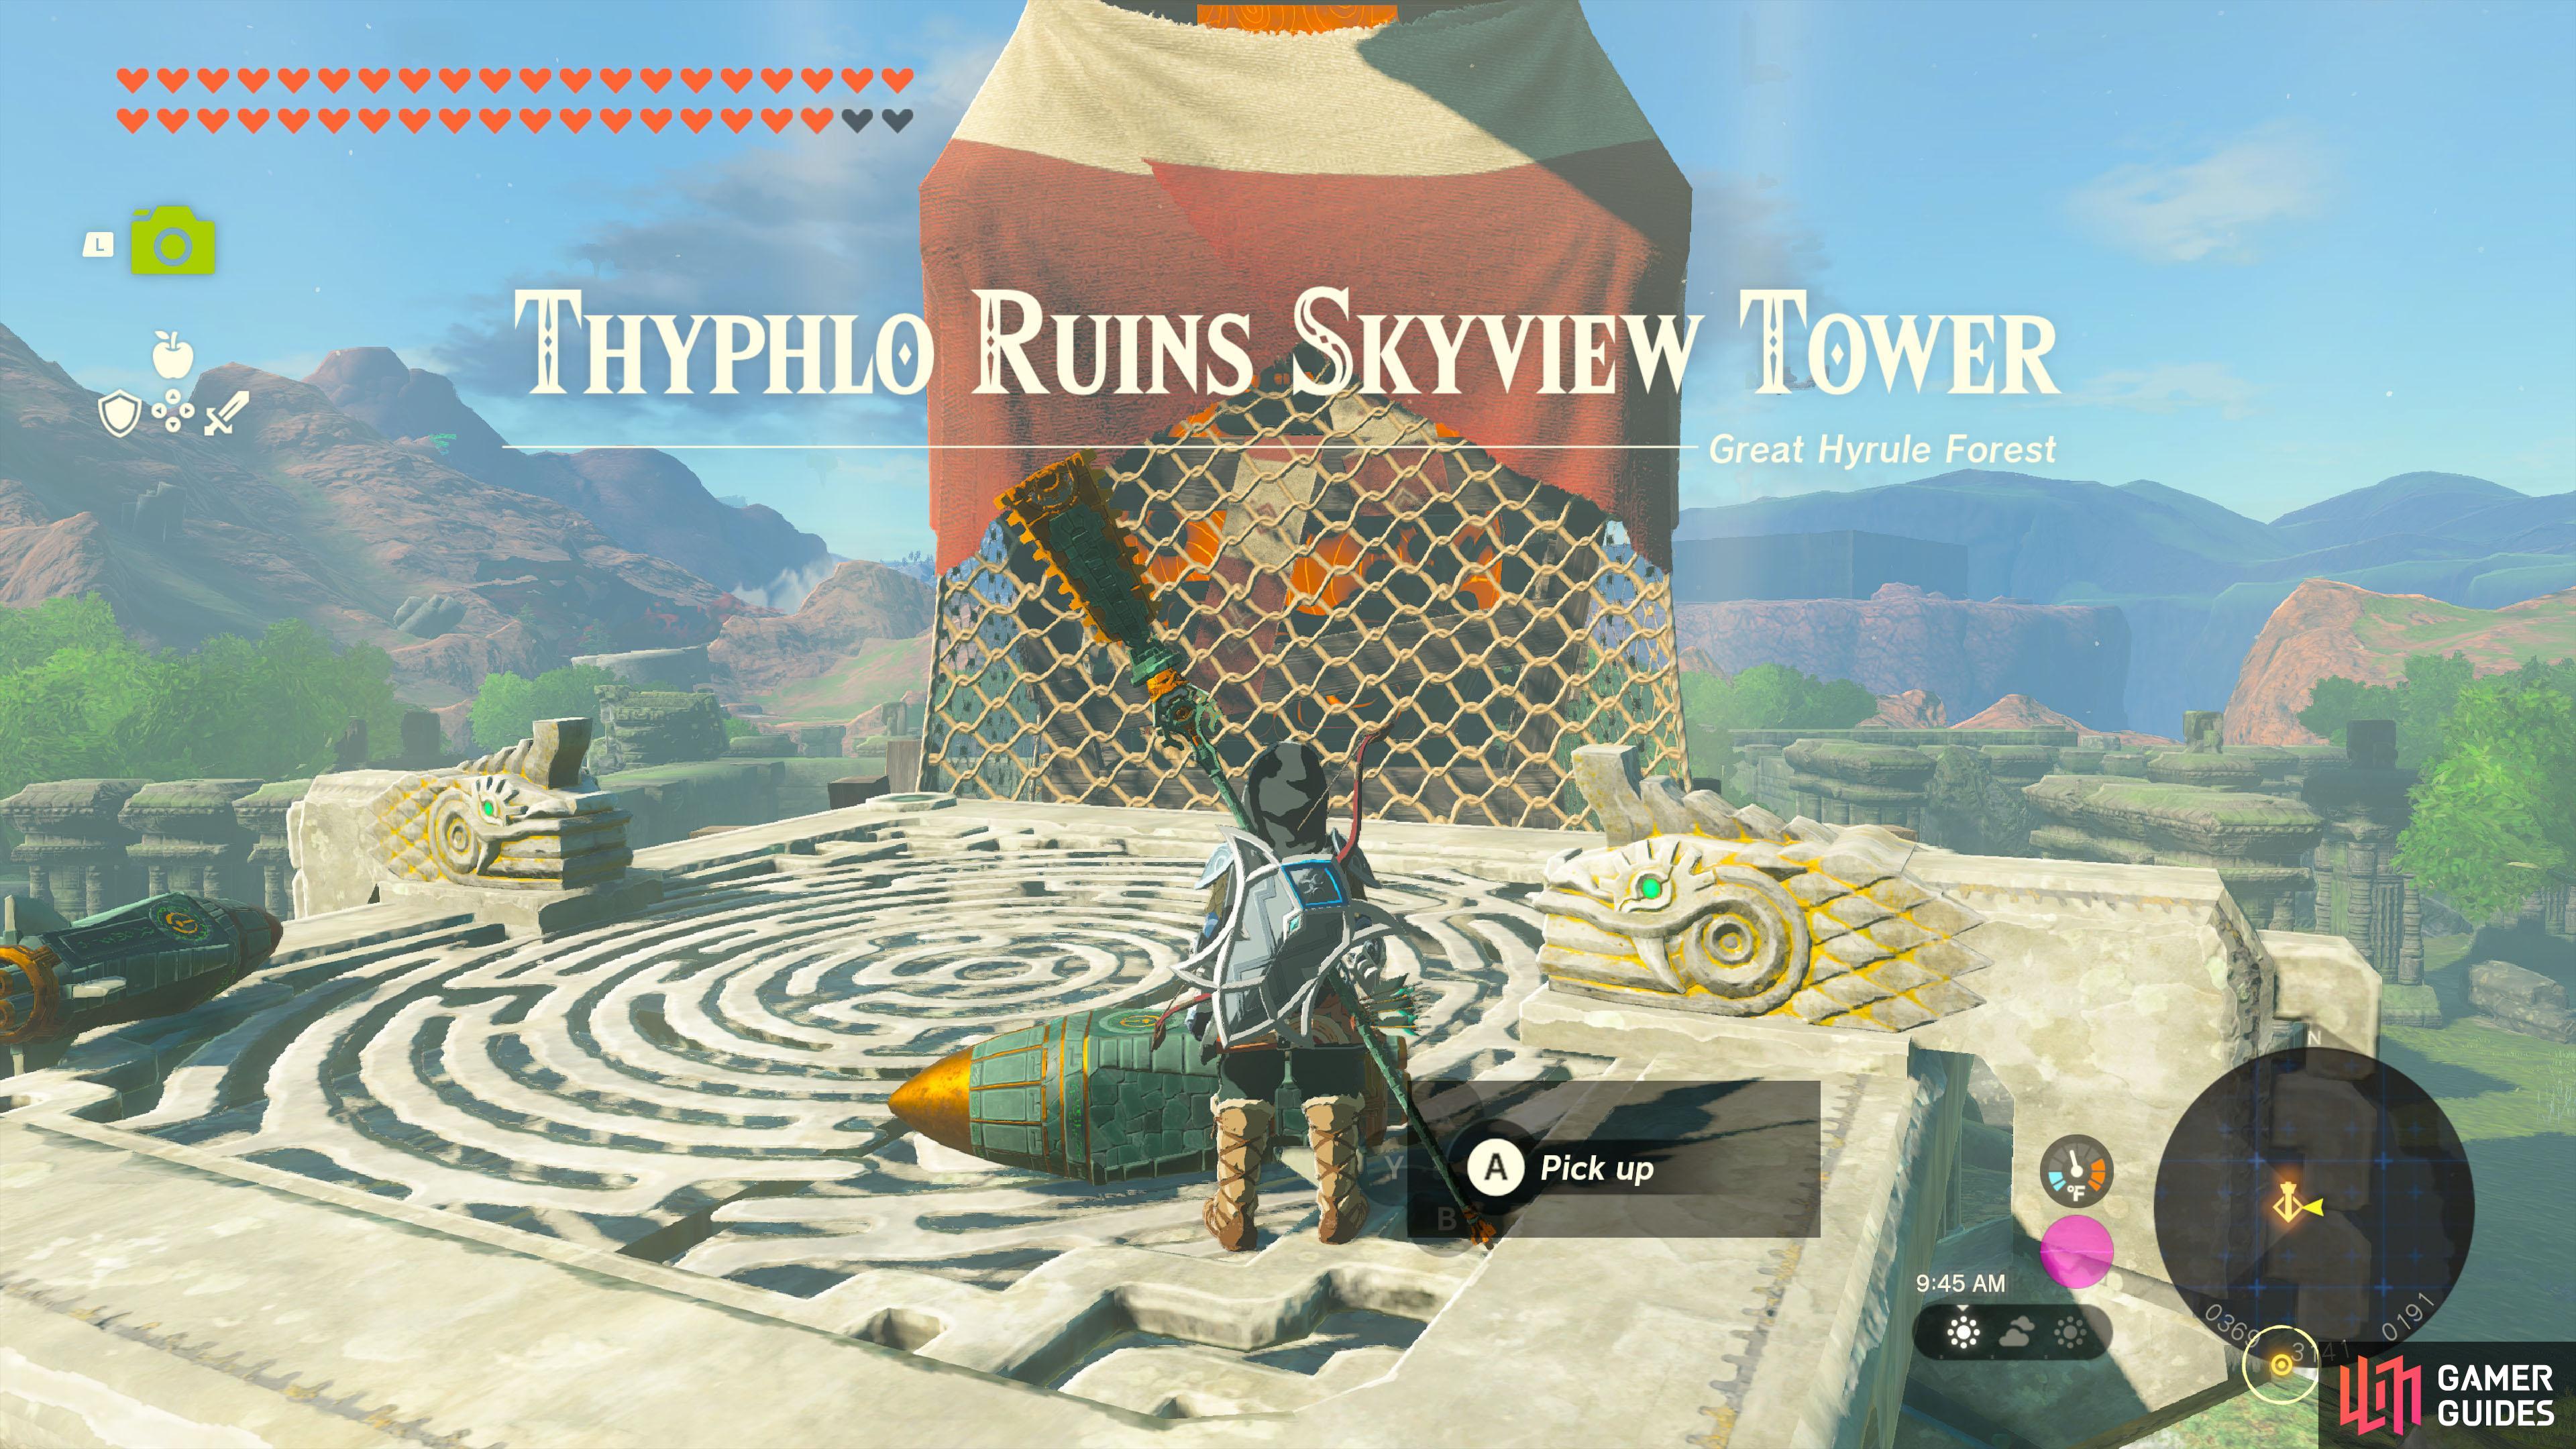 The !Thyphlo Ruins Skyview Tower